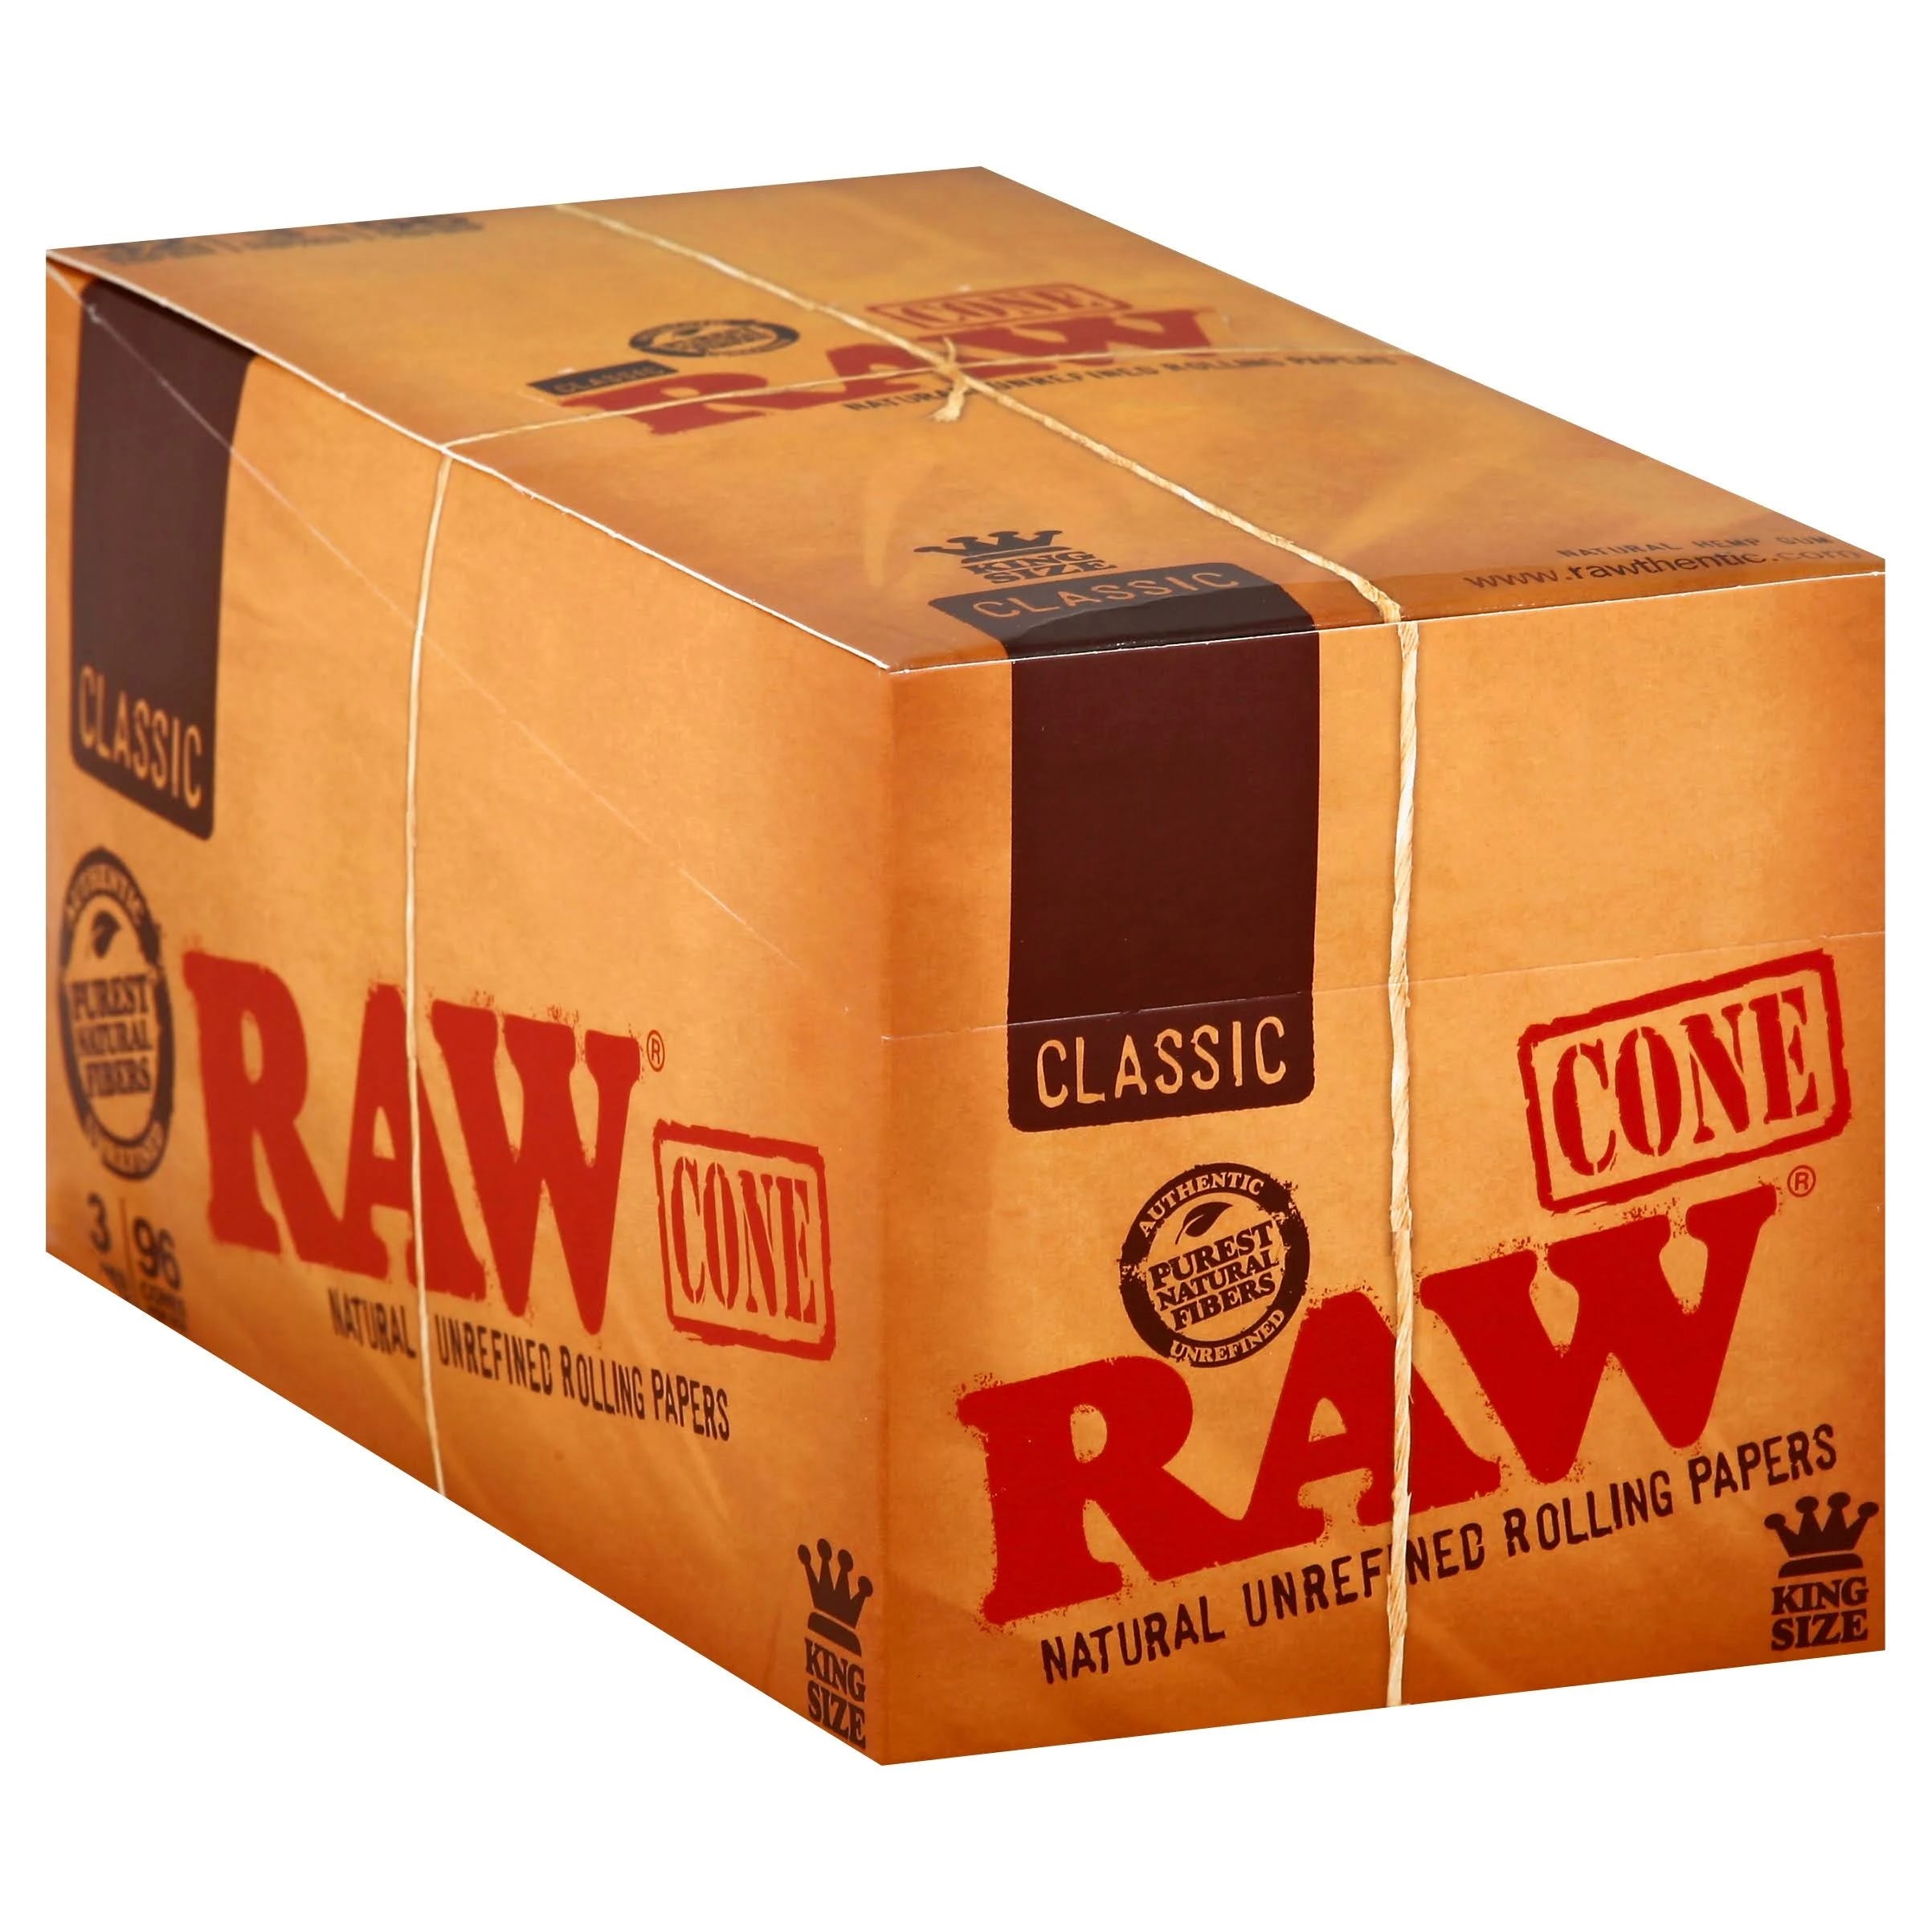 Raw Natural Unrefined Rolling Papers - Classic King Size Pack of 32 | Image